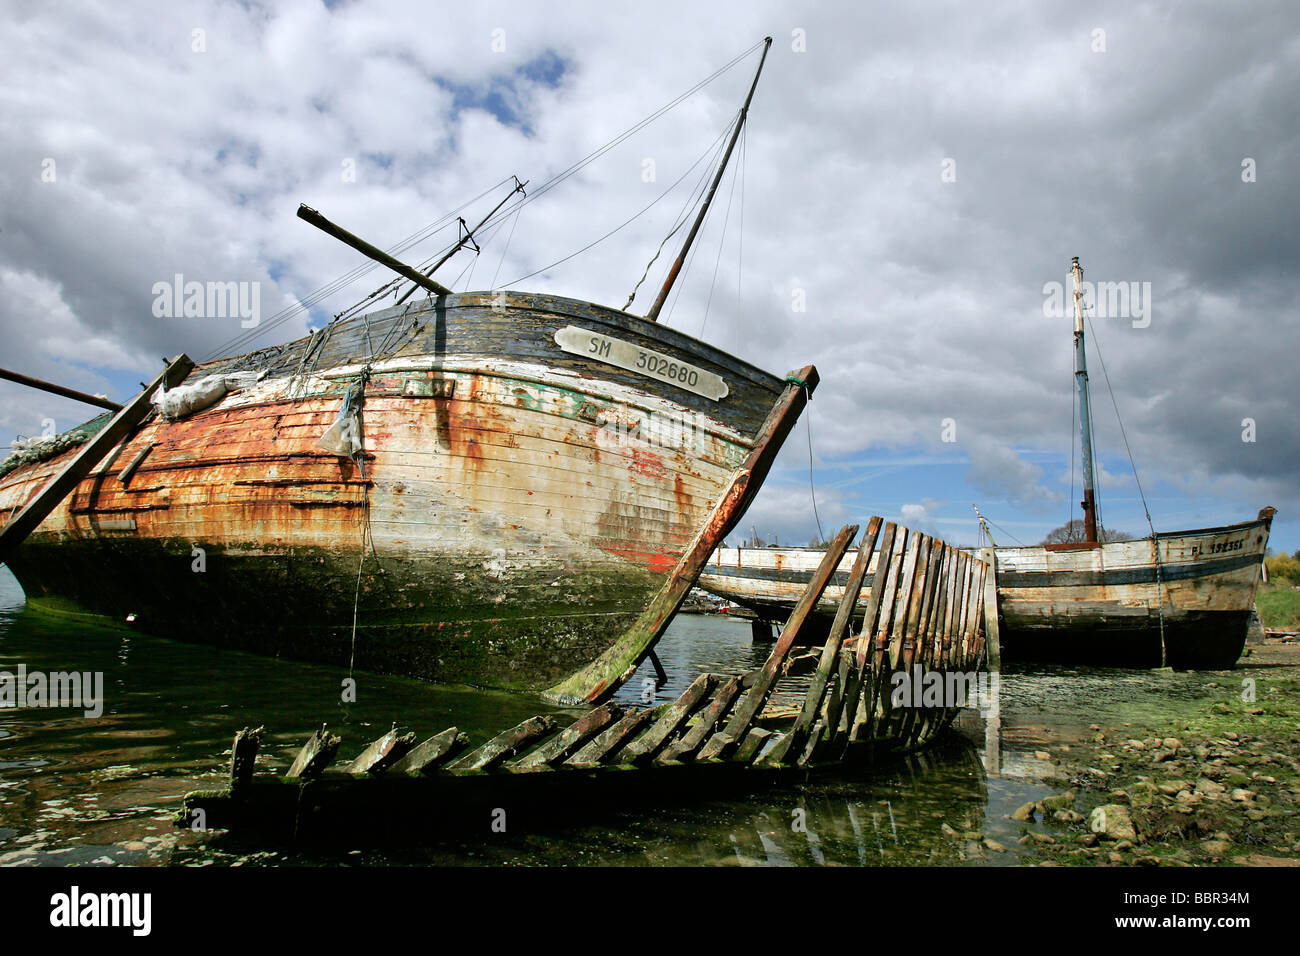 THE PASSAGERE BOAT GRAVEYARD ON THE BANKS OF THE RANCE, QUELMER, ILLE-ET-VILAINE (35), FRANCE Stock Photo